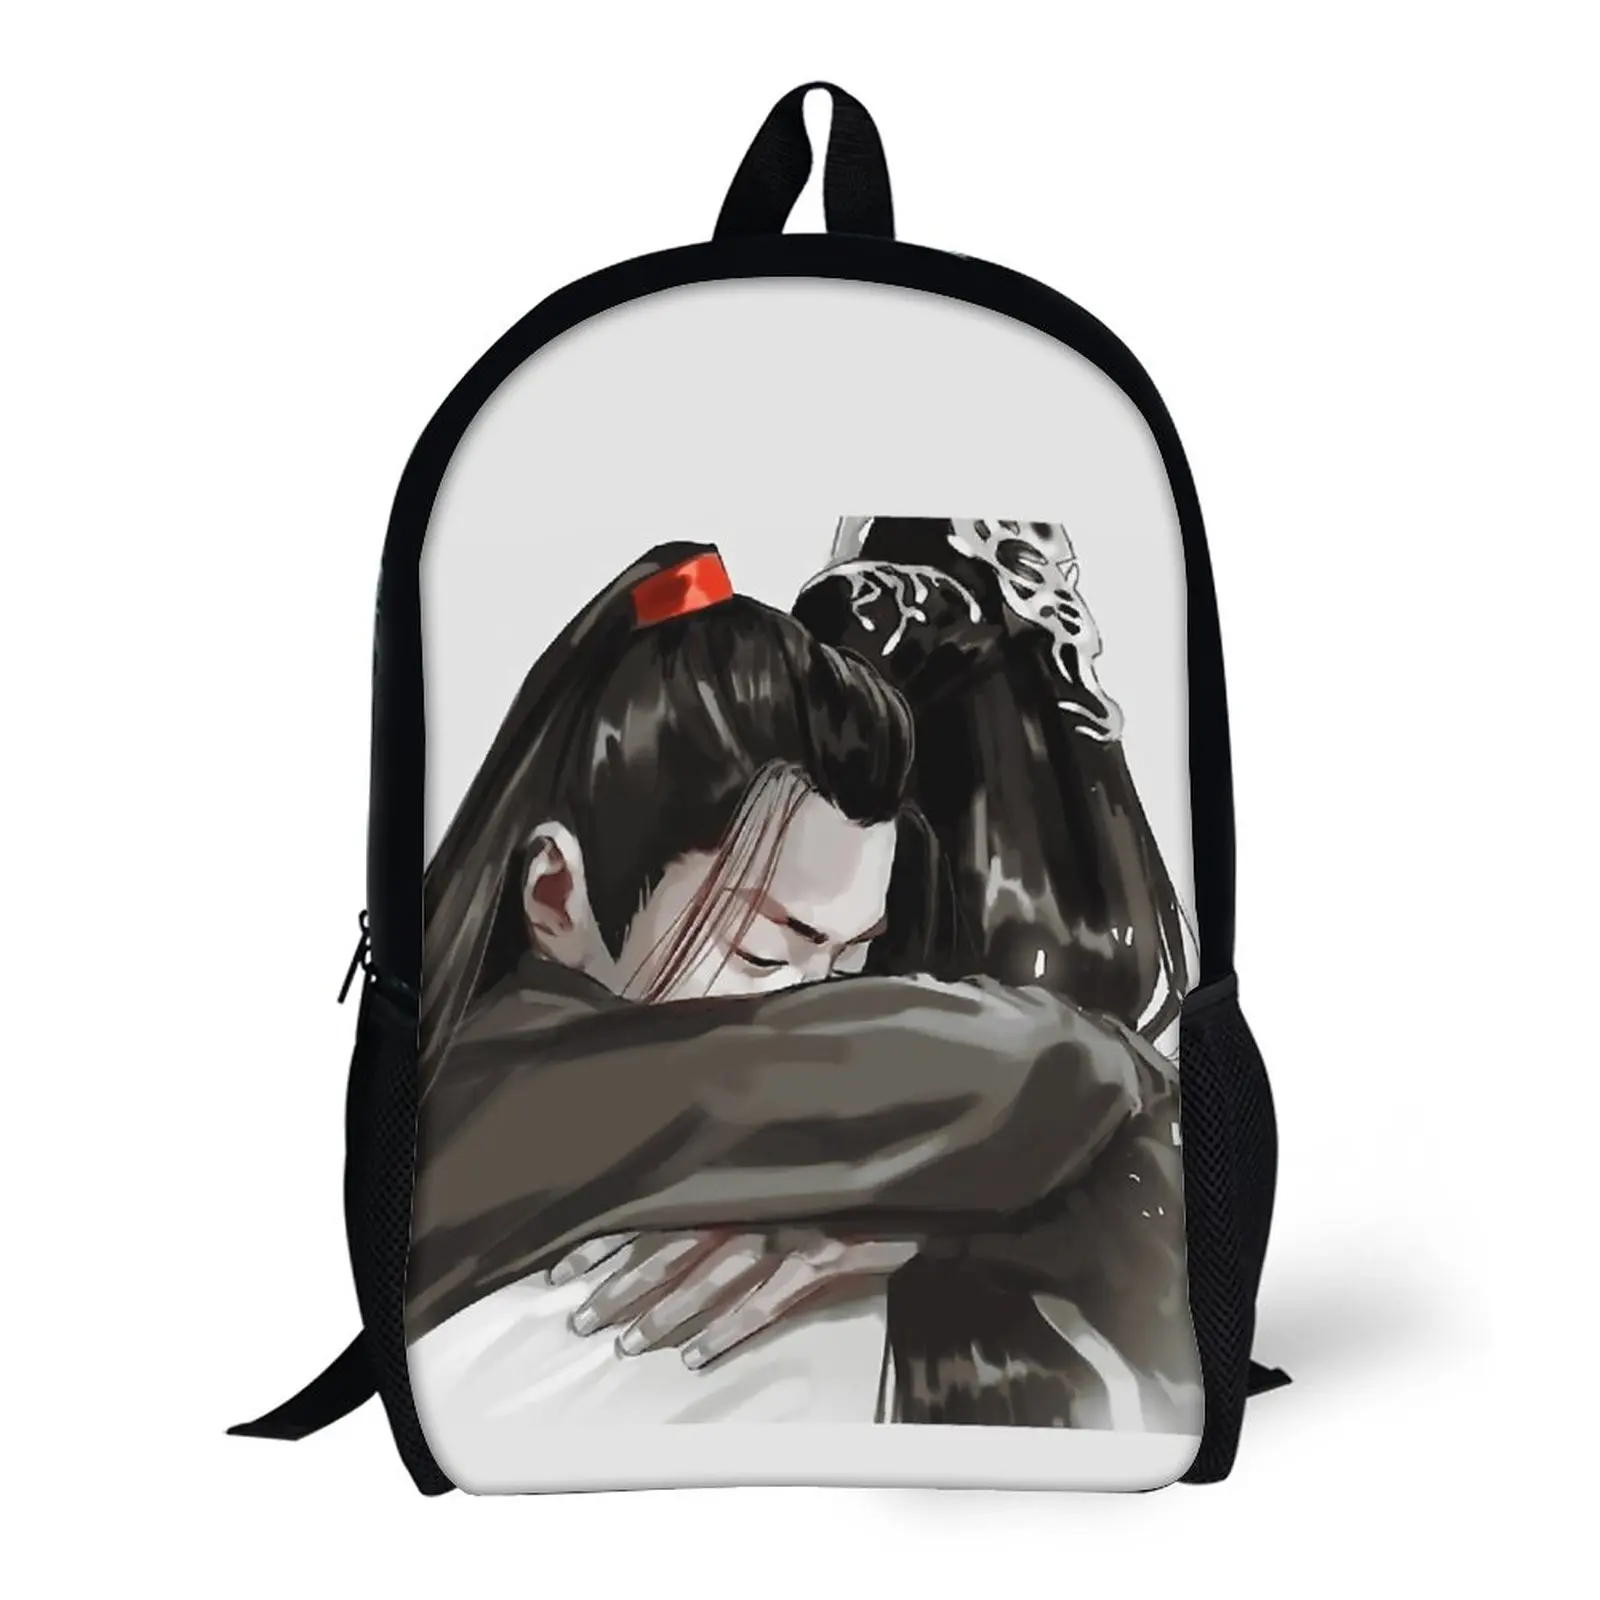 

17 Inch Shoulder Backpack MDZS The Untamed Wangxian Hug Canvas Print Lasting Casual Graphic Cozy Summer Camps Field Pack